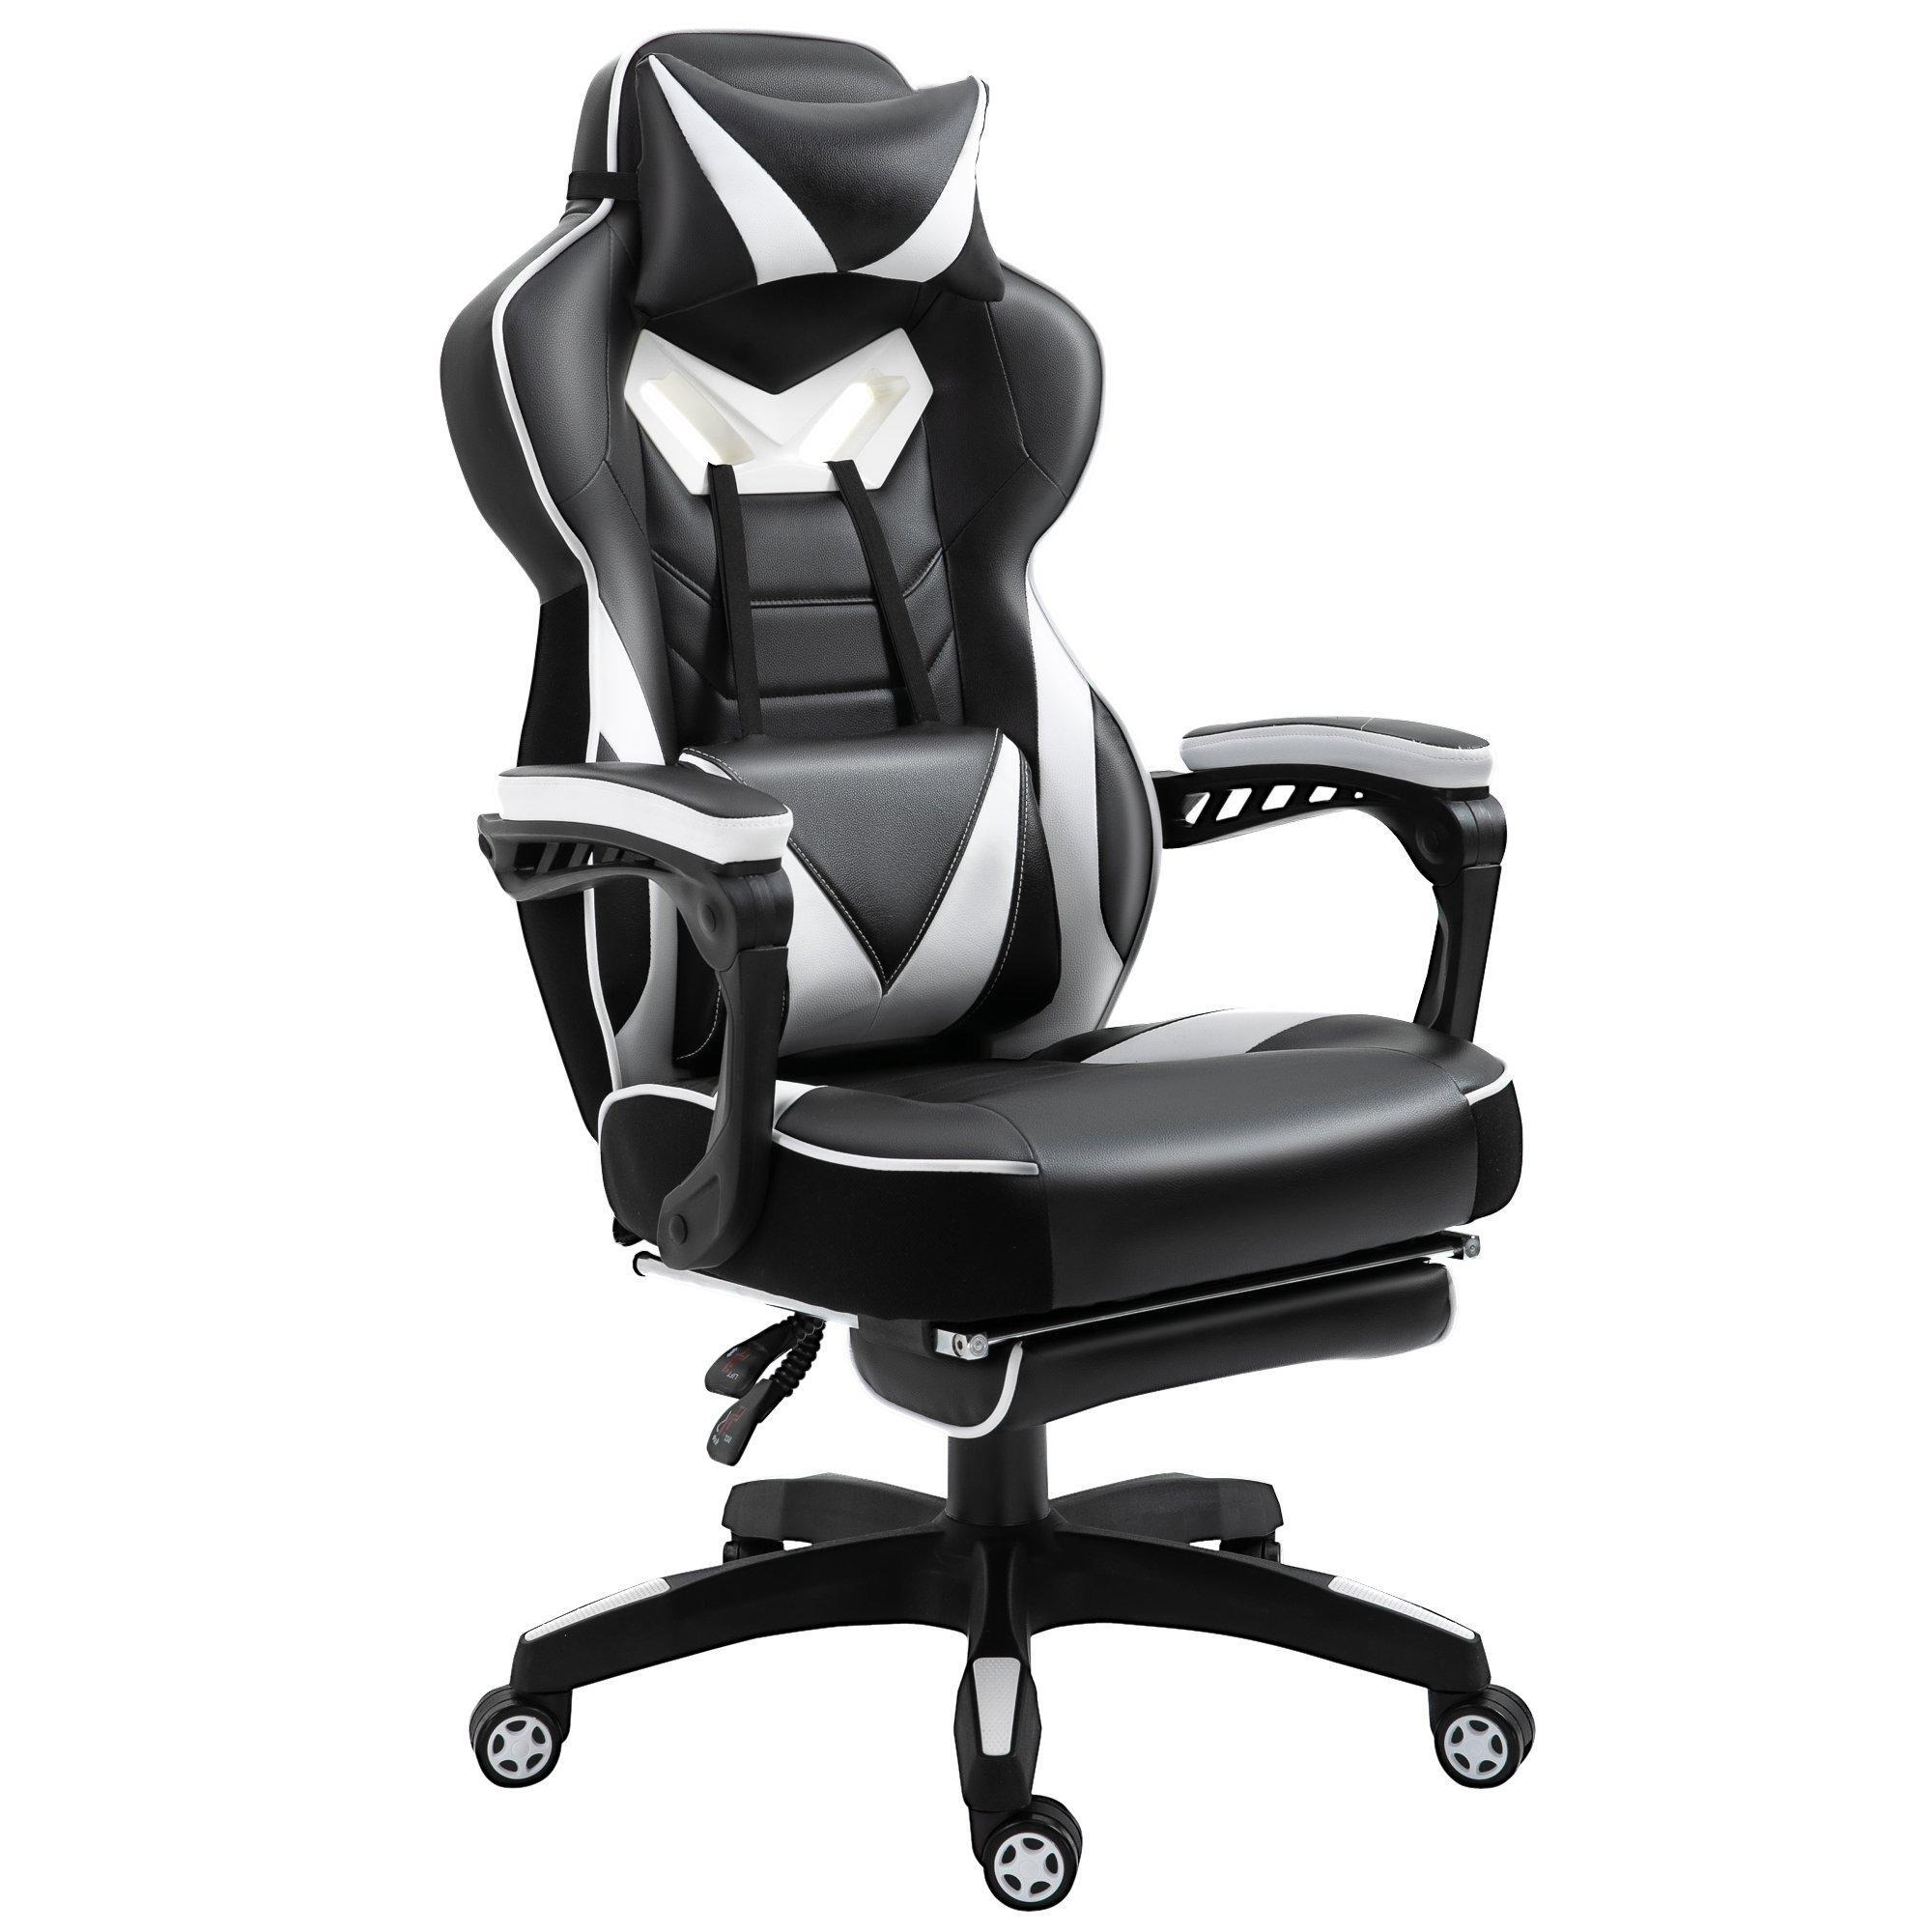 Gaming Chair Ergonomic Reclining with Manual Footrest Wheels Stylish - image 1